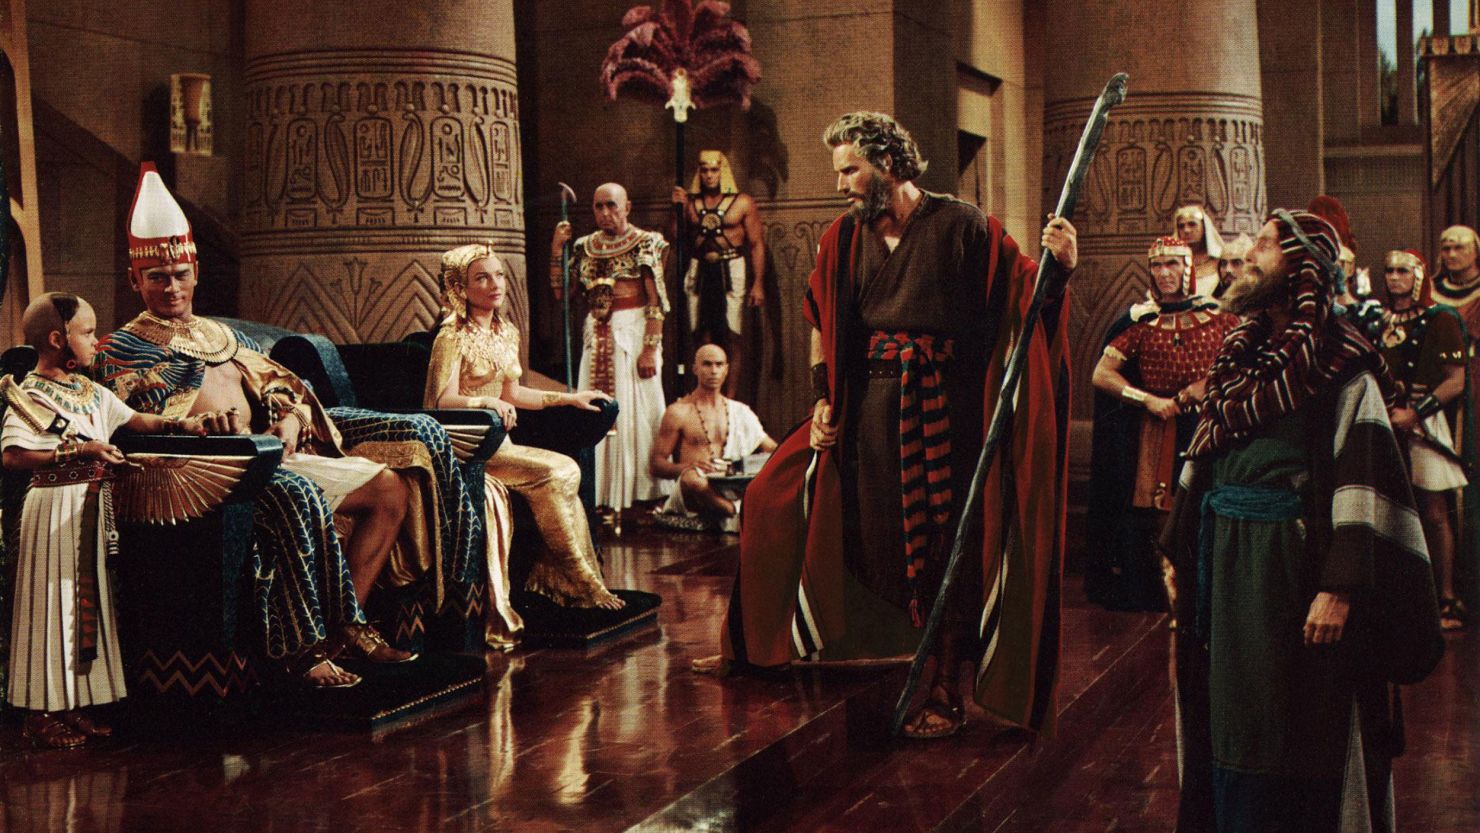 Yul Brynner and Anne Baxter (seated, left) as Rameses and Nefretiri and Charlton Heston (center) as Moses in the 1956 film "The Ten Commandments."